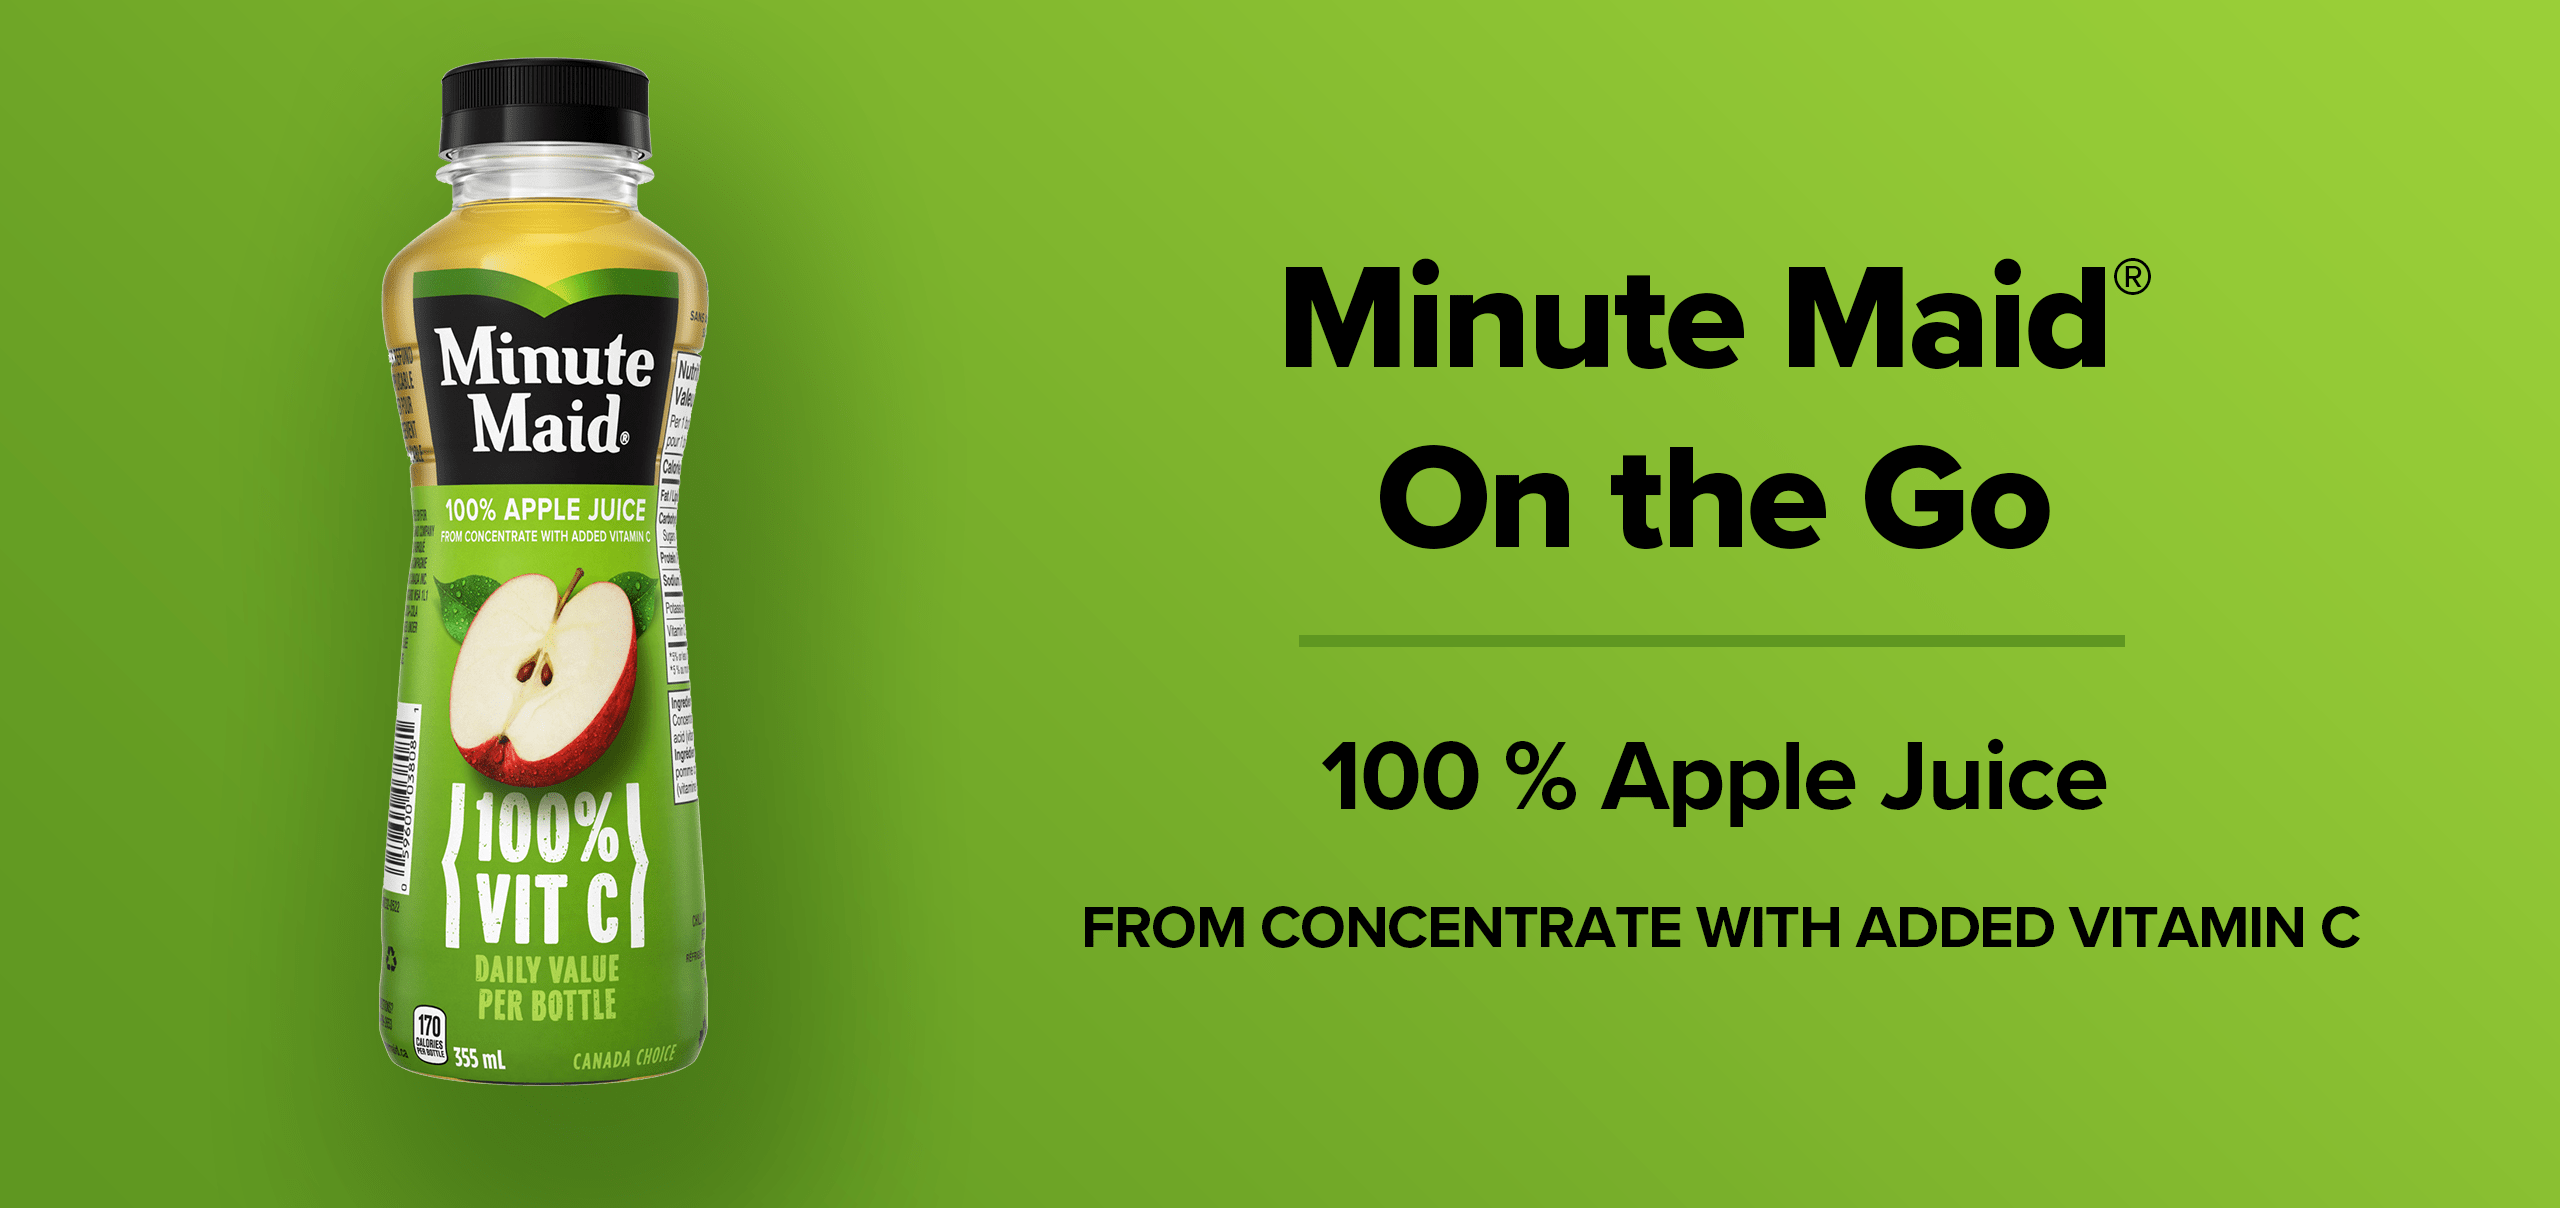 Minute Maid On the Go. 100 % Apple Juice. From concentrate with added vitamin C